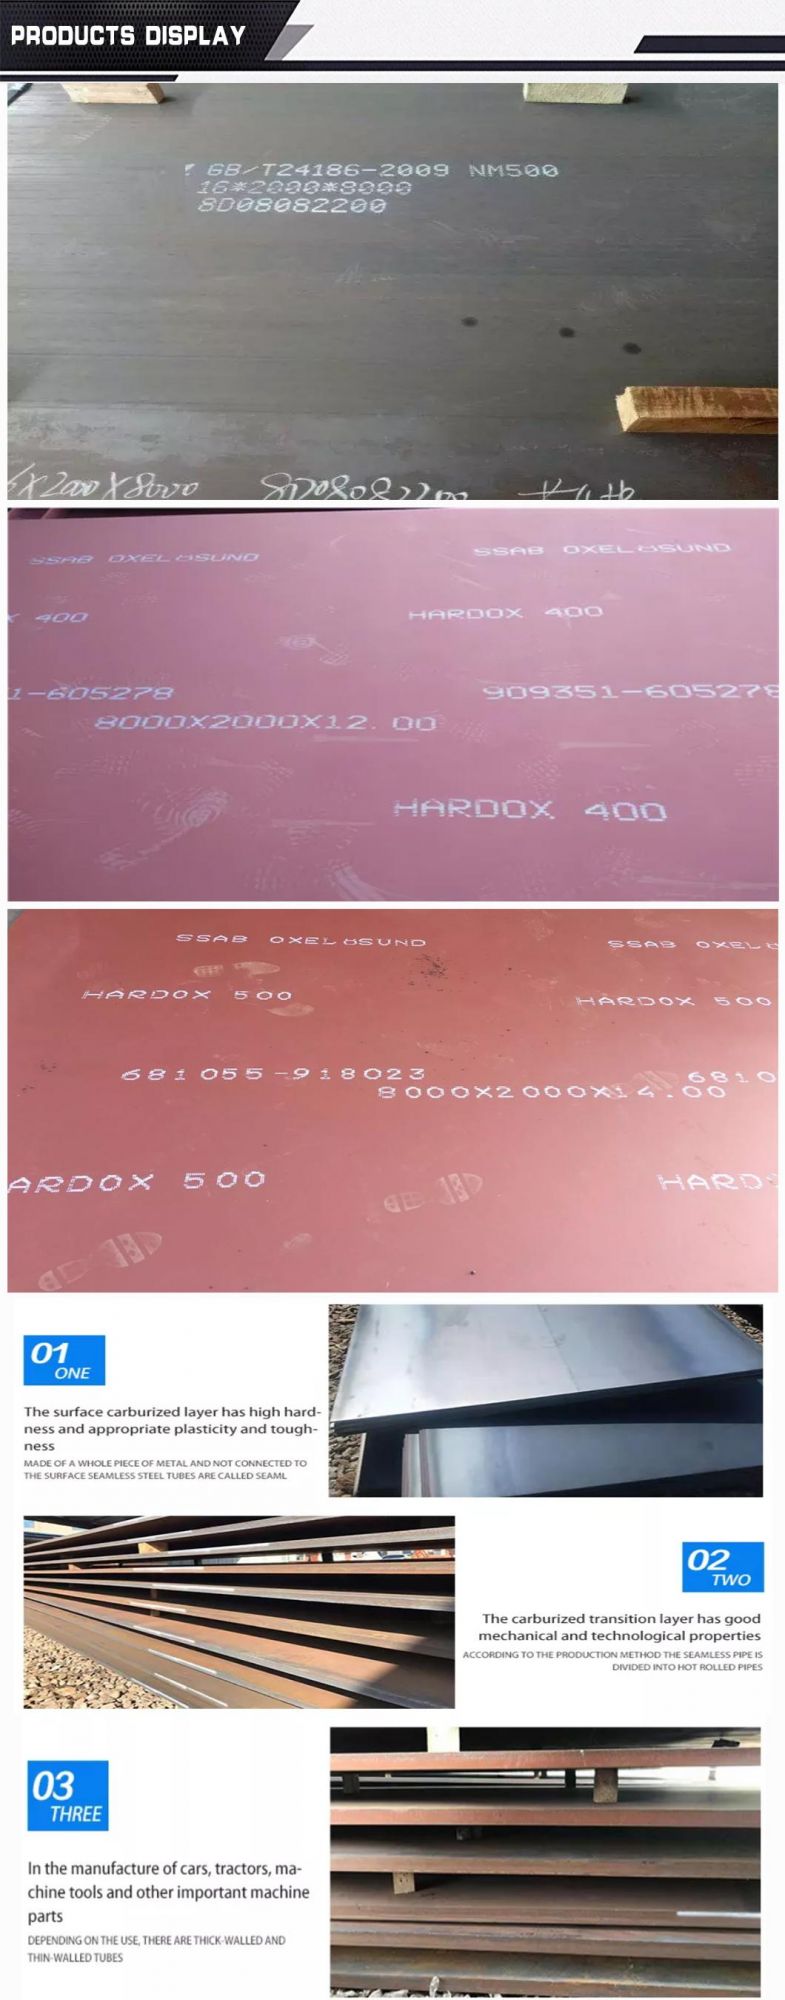 Hot Rolled Nm500 Hardoxs 450 550 500 600 Wear Resistant Steel From Swedish Steel Plate